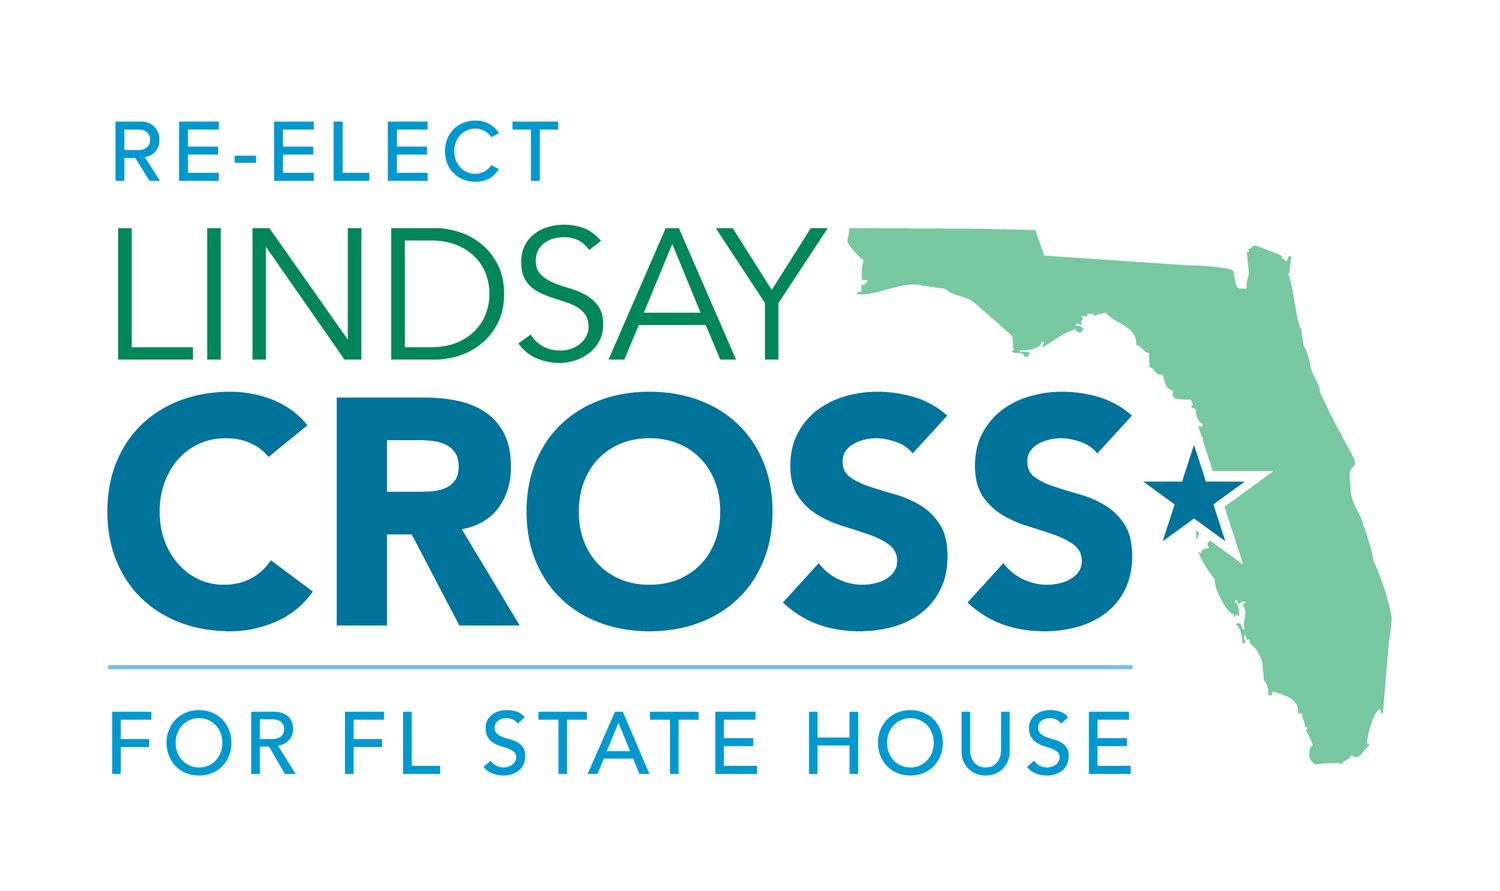 Lindsay Cross for State House